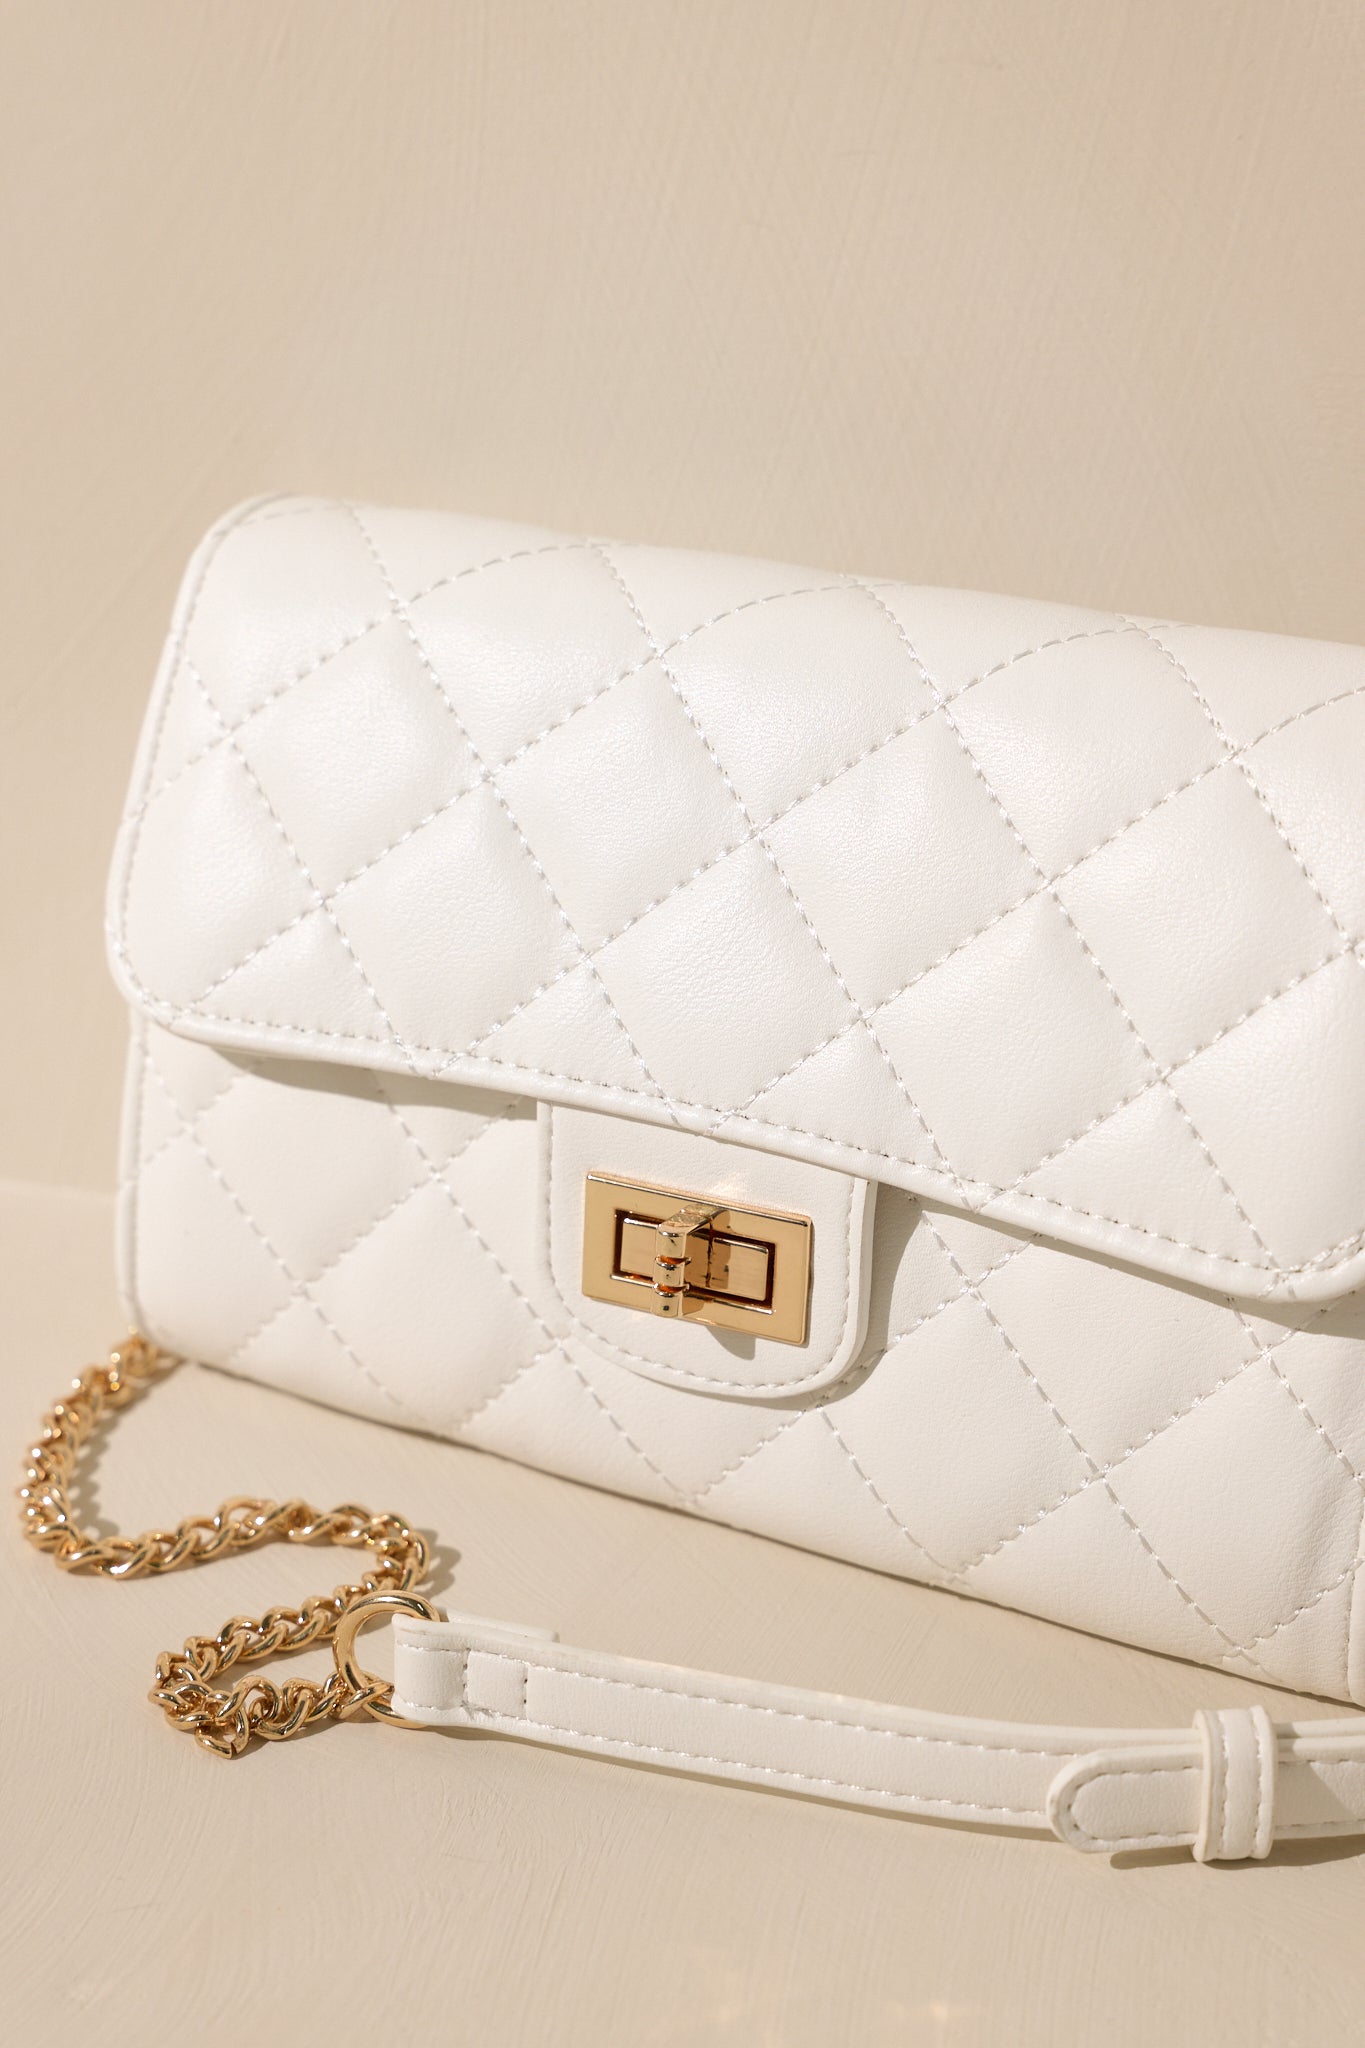 Stand alone view of this white bag that features gold hardware, a quilted design, turn lock closure, a zipper pocket inside, and a detachable chain shoulder strap.